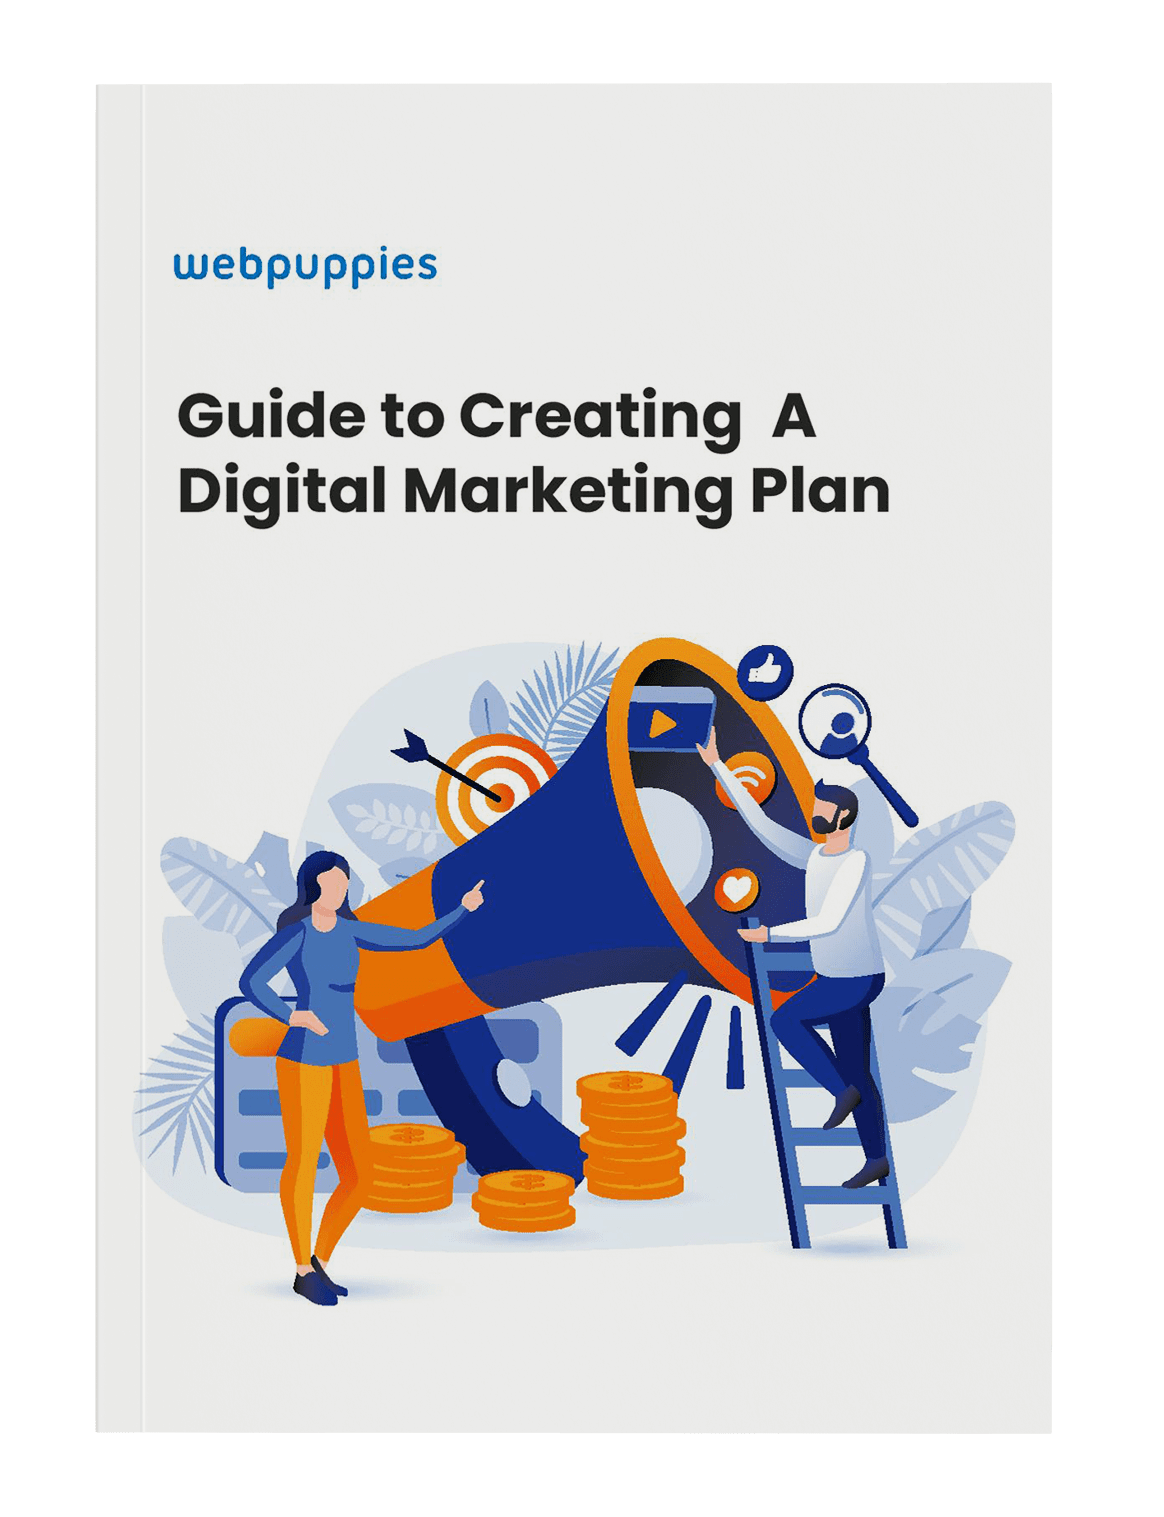 Guide to Creating a Digital Marketing Plan- Standing